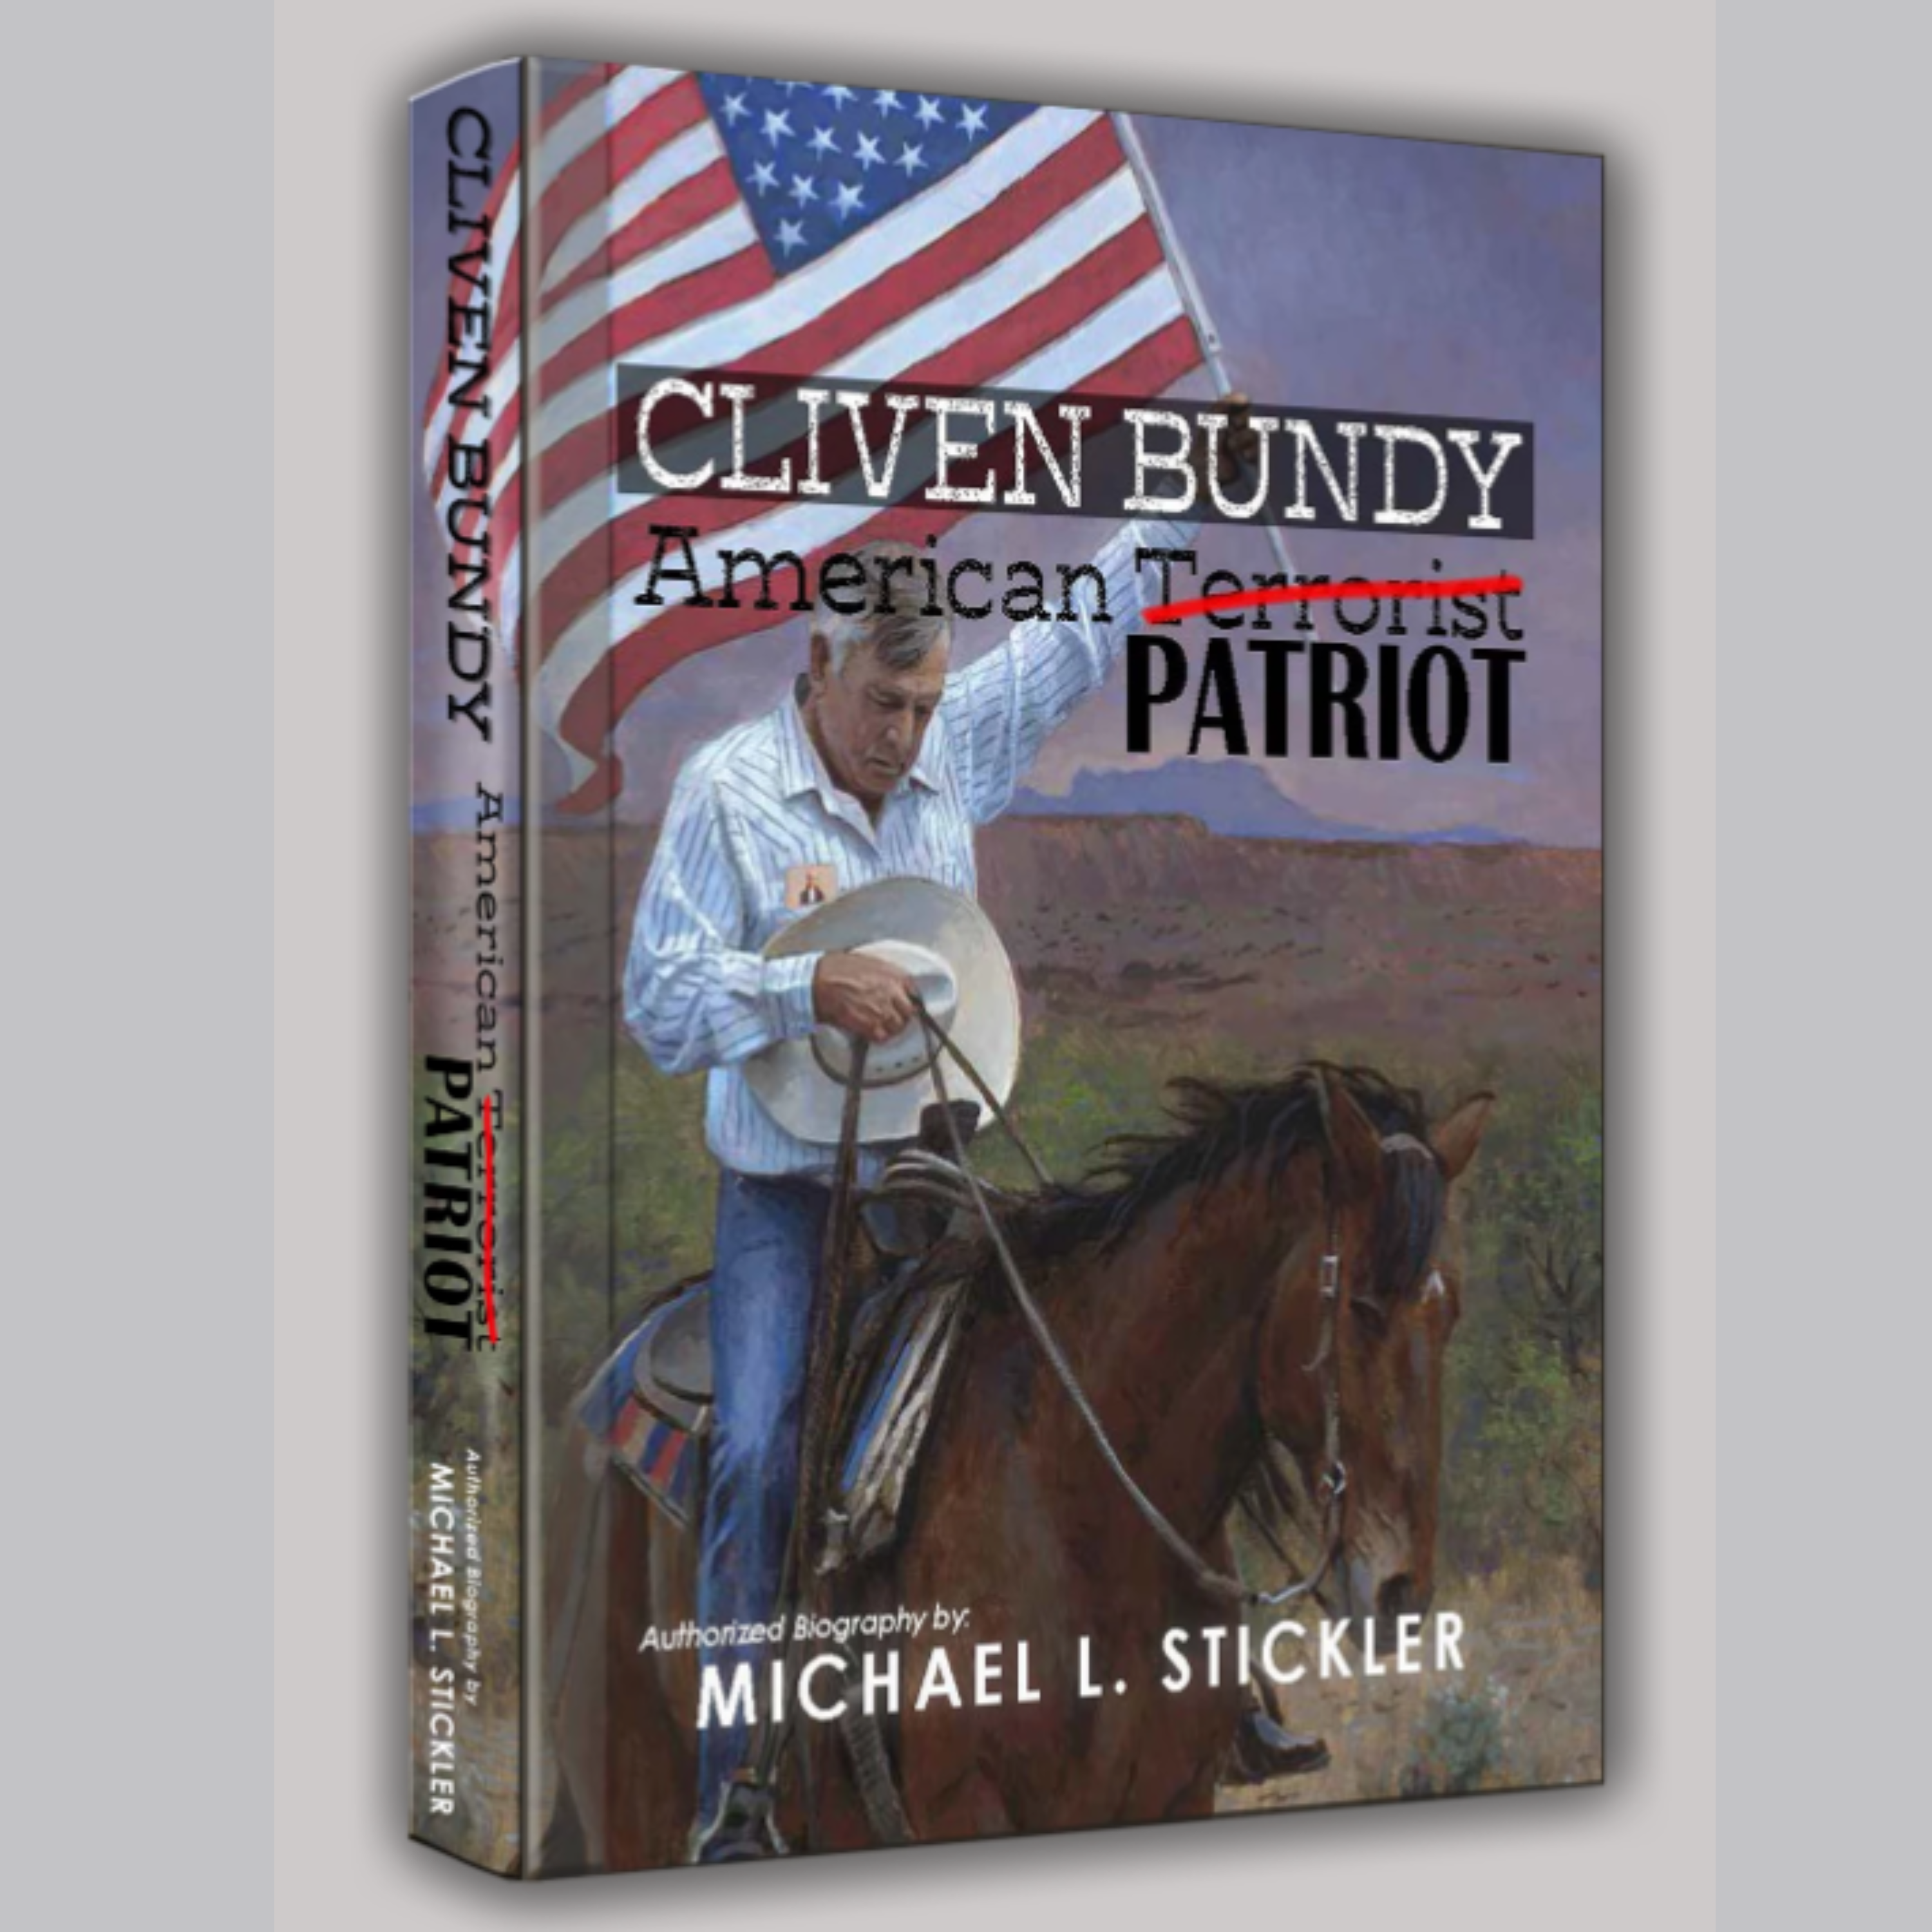 Whatever happened to Nevada cattle rancher Cliven Bundy?